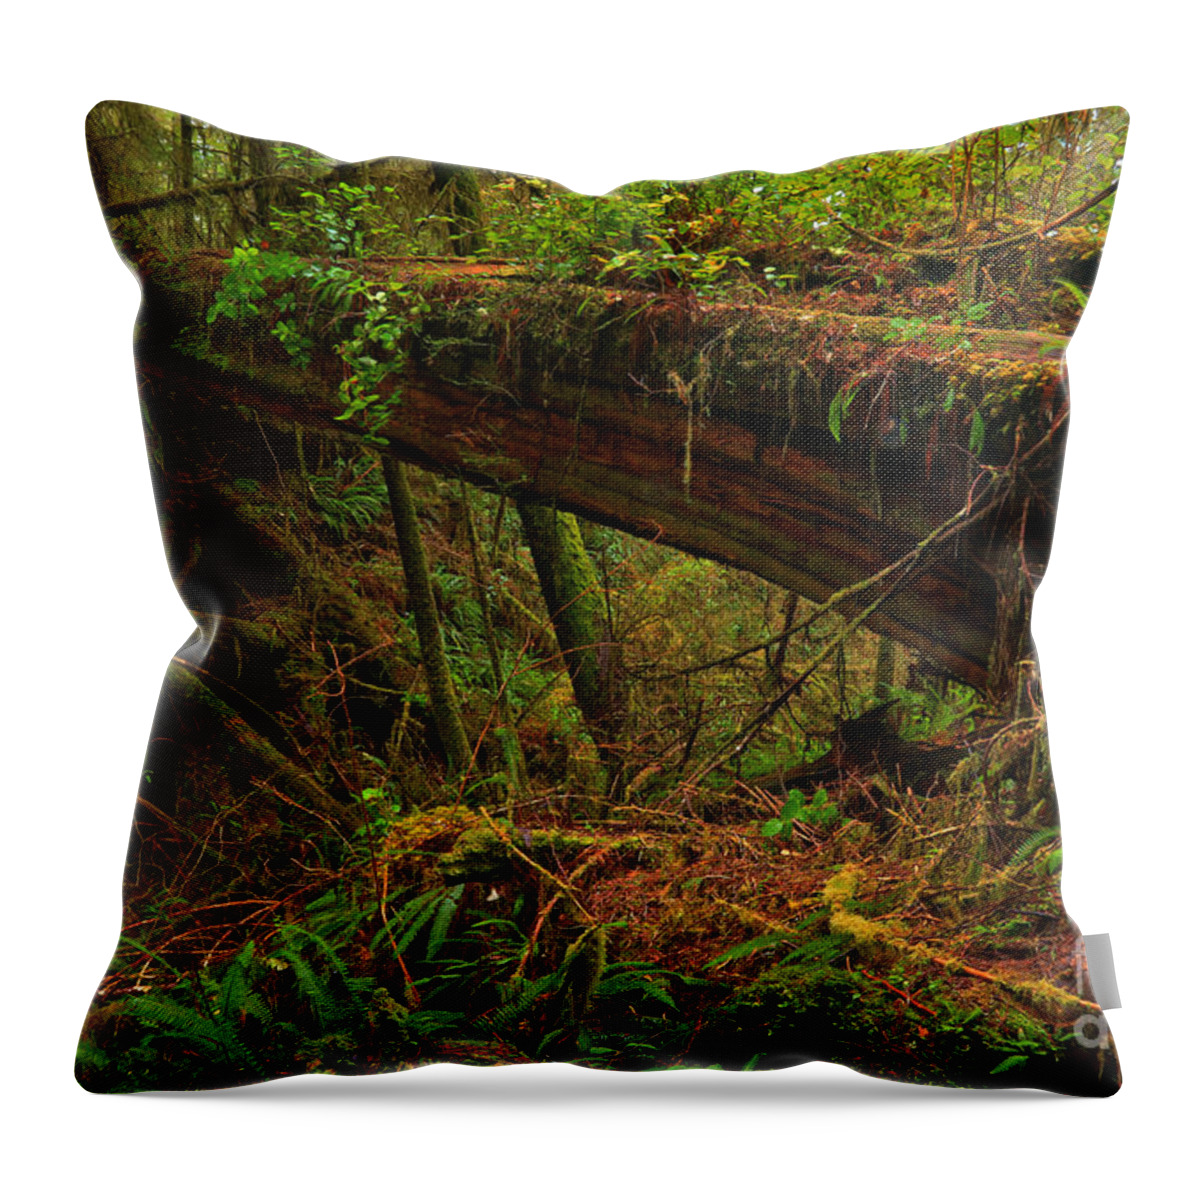 Pacific Rim National Park Throw Pillow featuring the photograph Tofino Natural Bridge by Adam Jewell